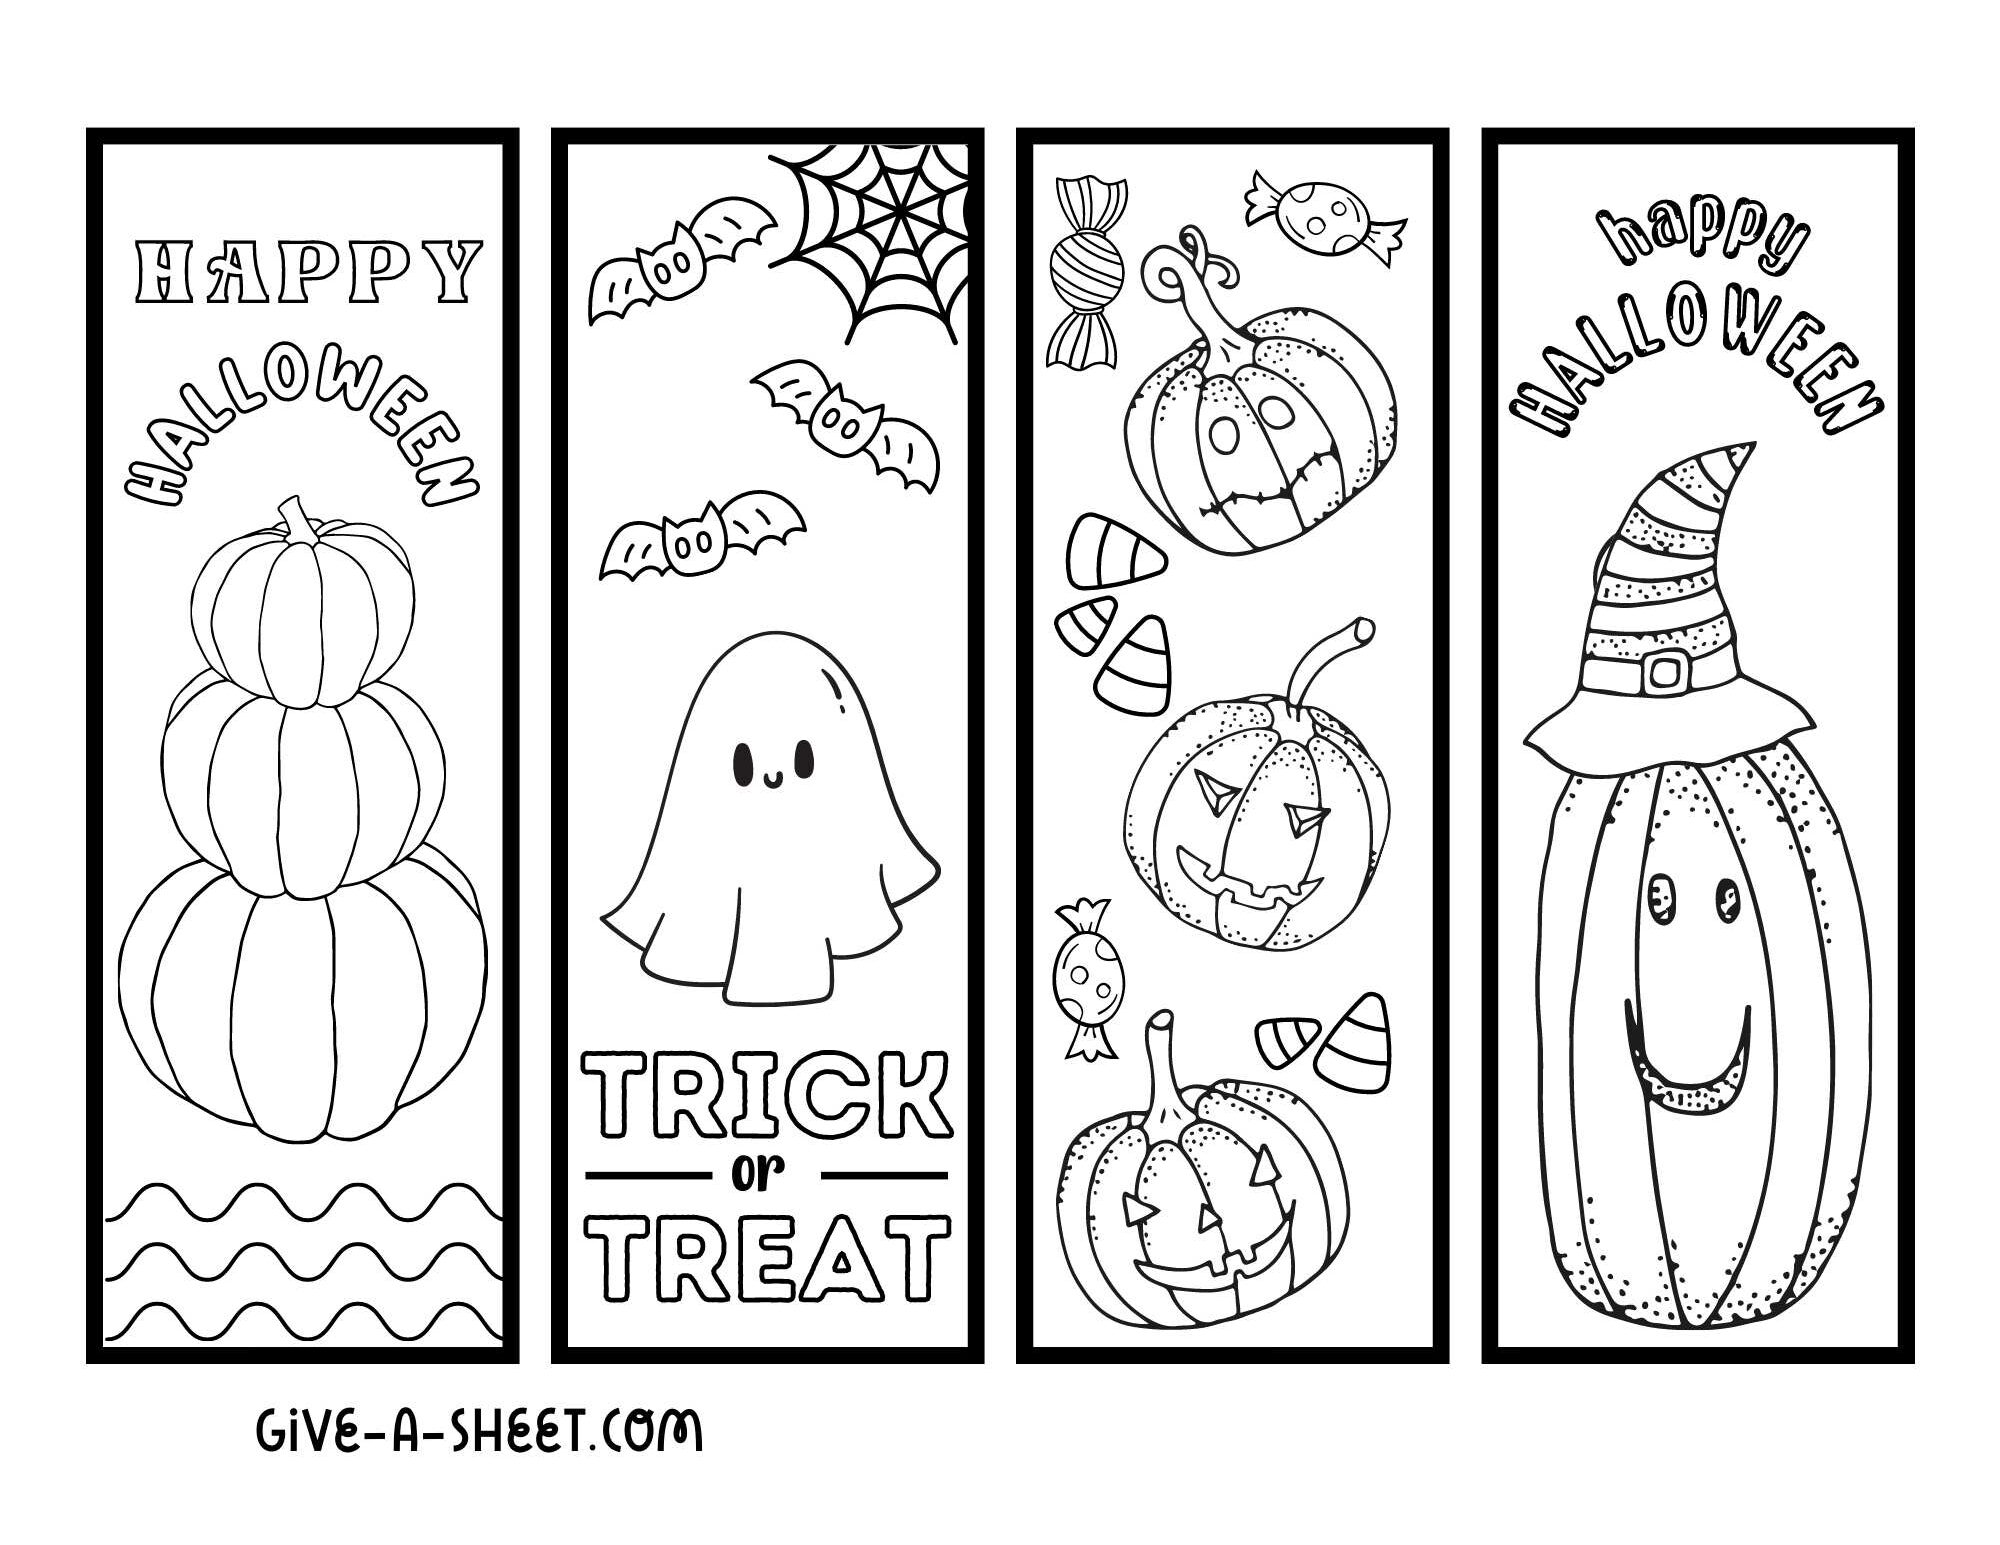 Halloween bookmark coloring page for kids.